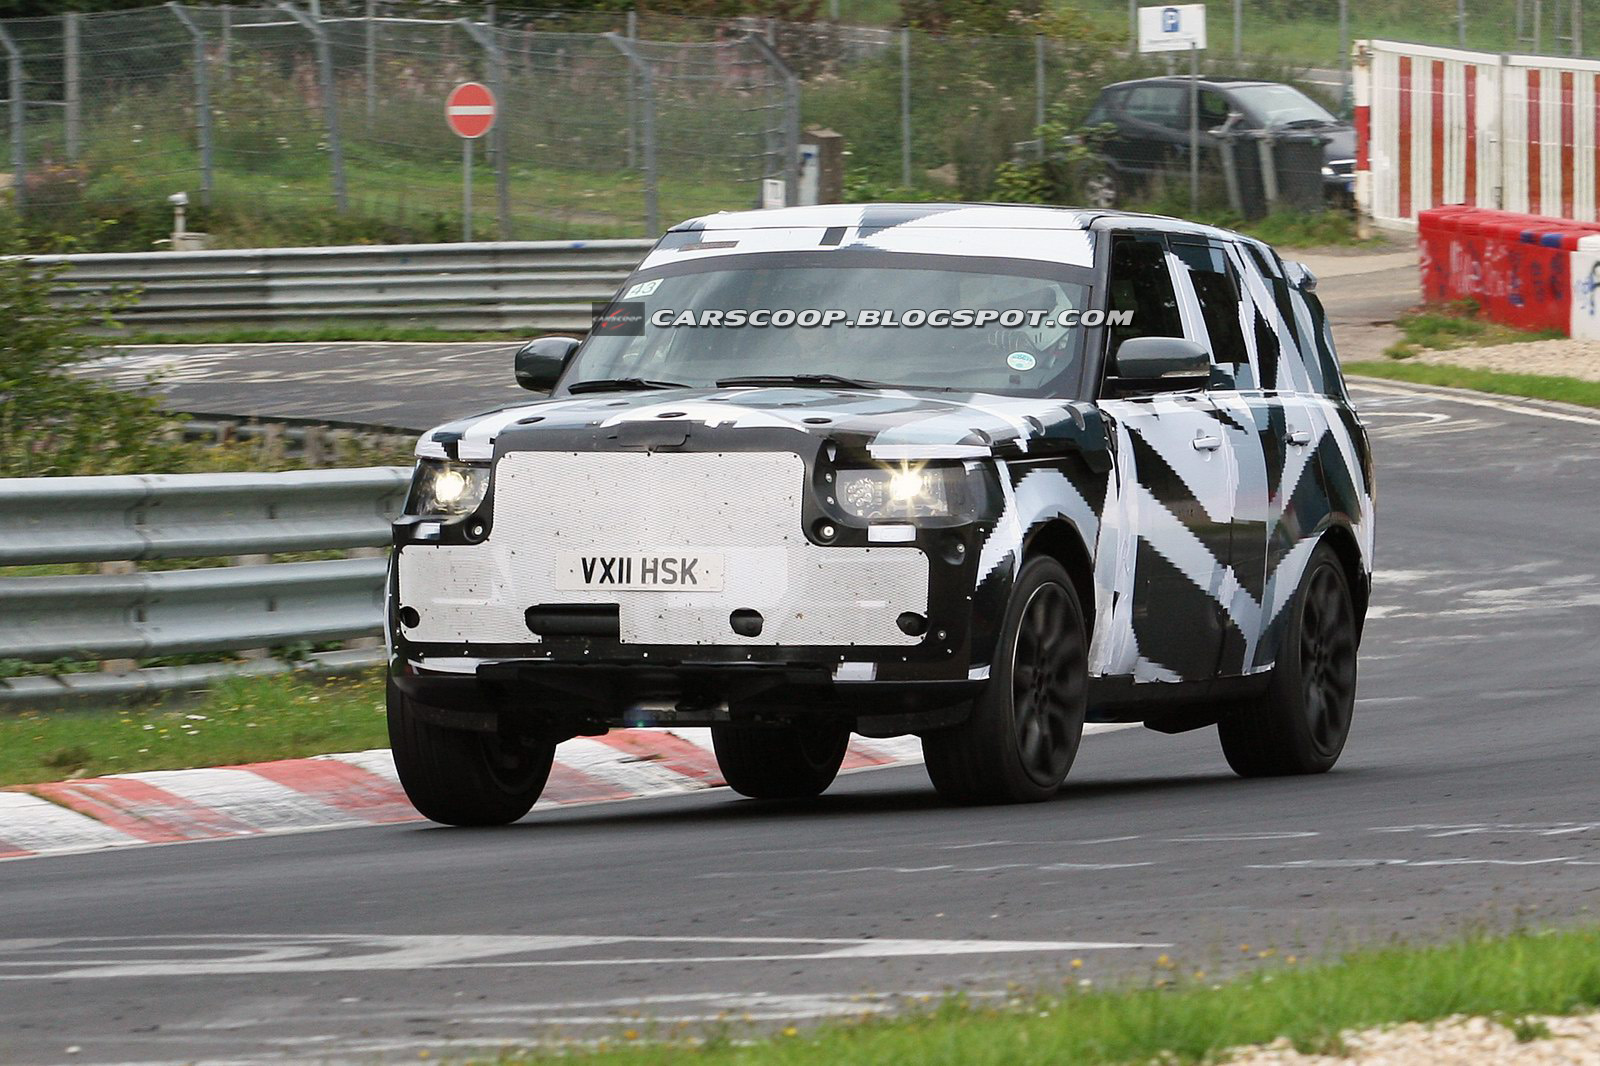 2013 Range Rover spotted